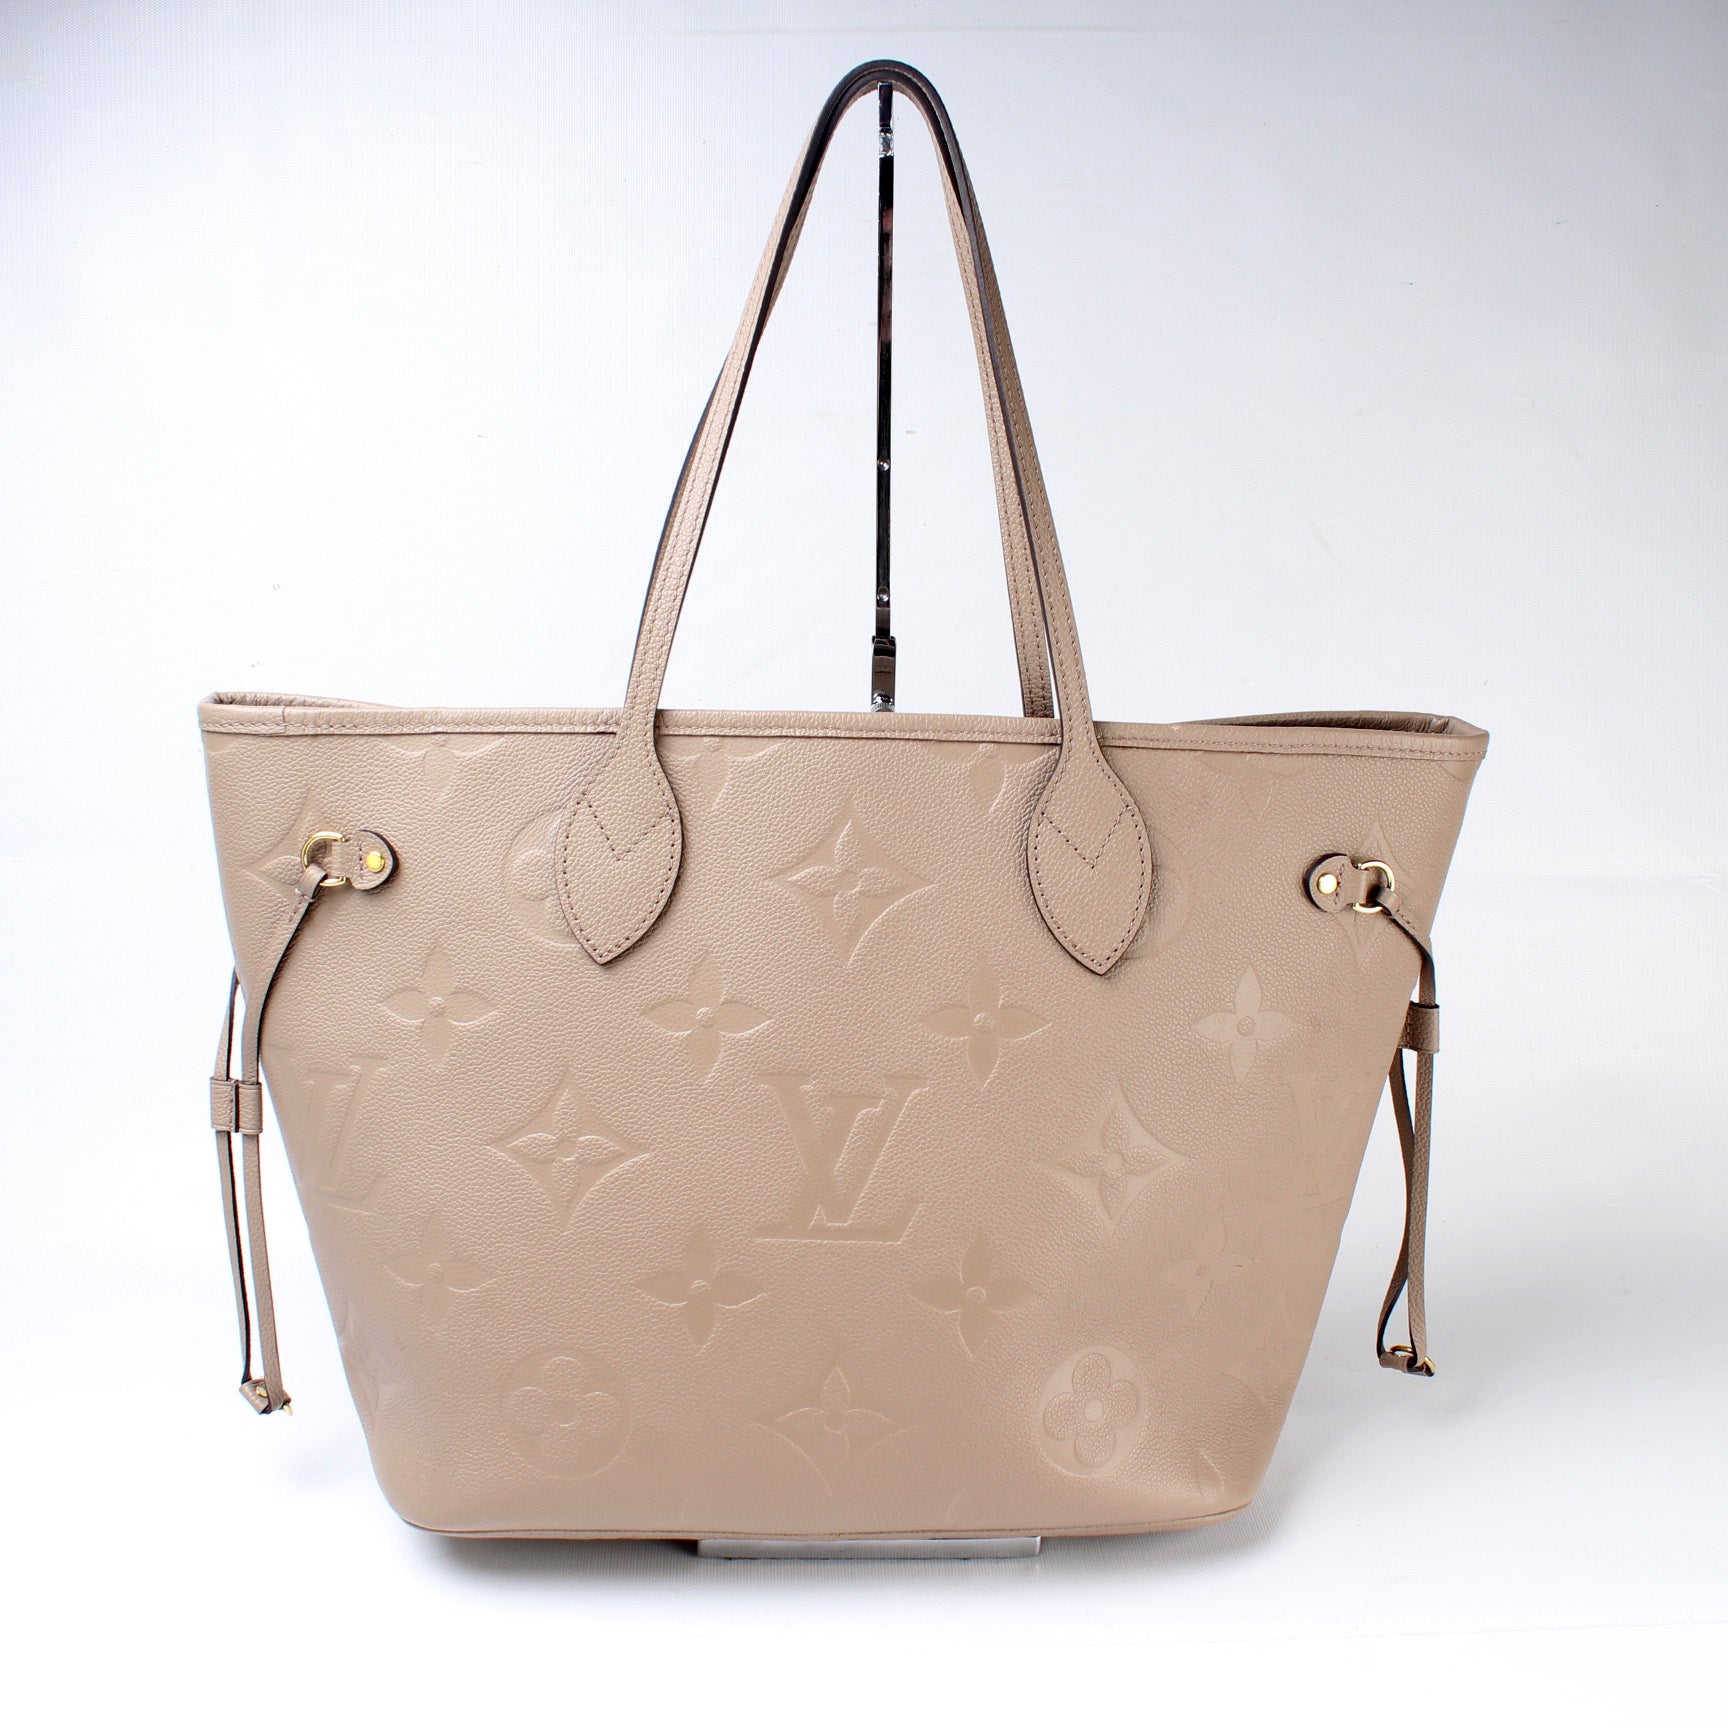 Louis Vuitton Empreinte Leather Neverfull mm M58907 by The-Collectory